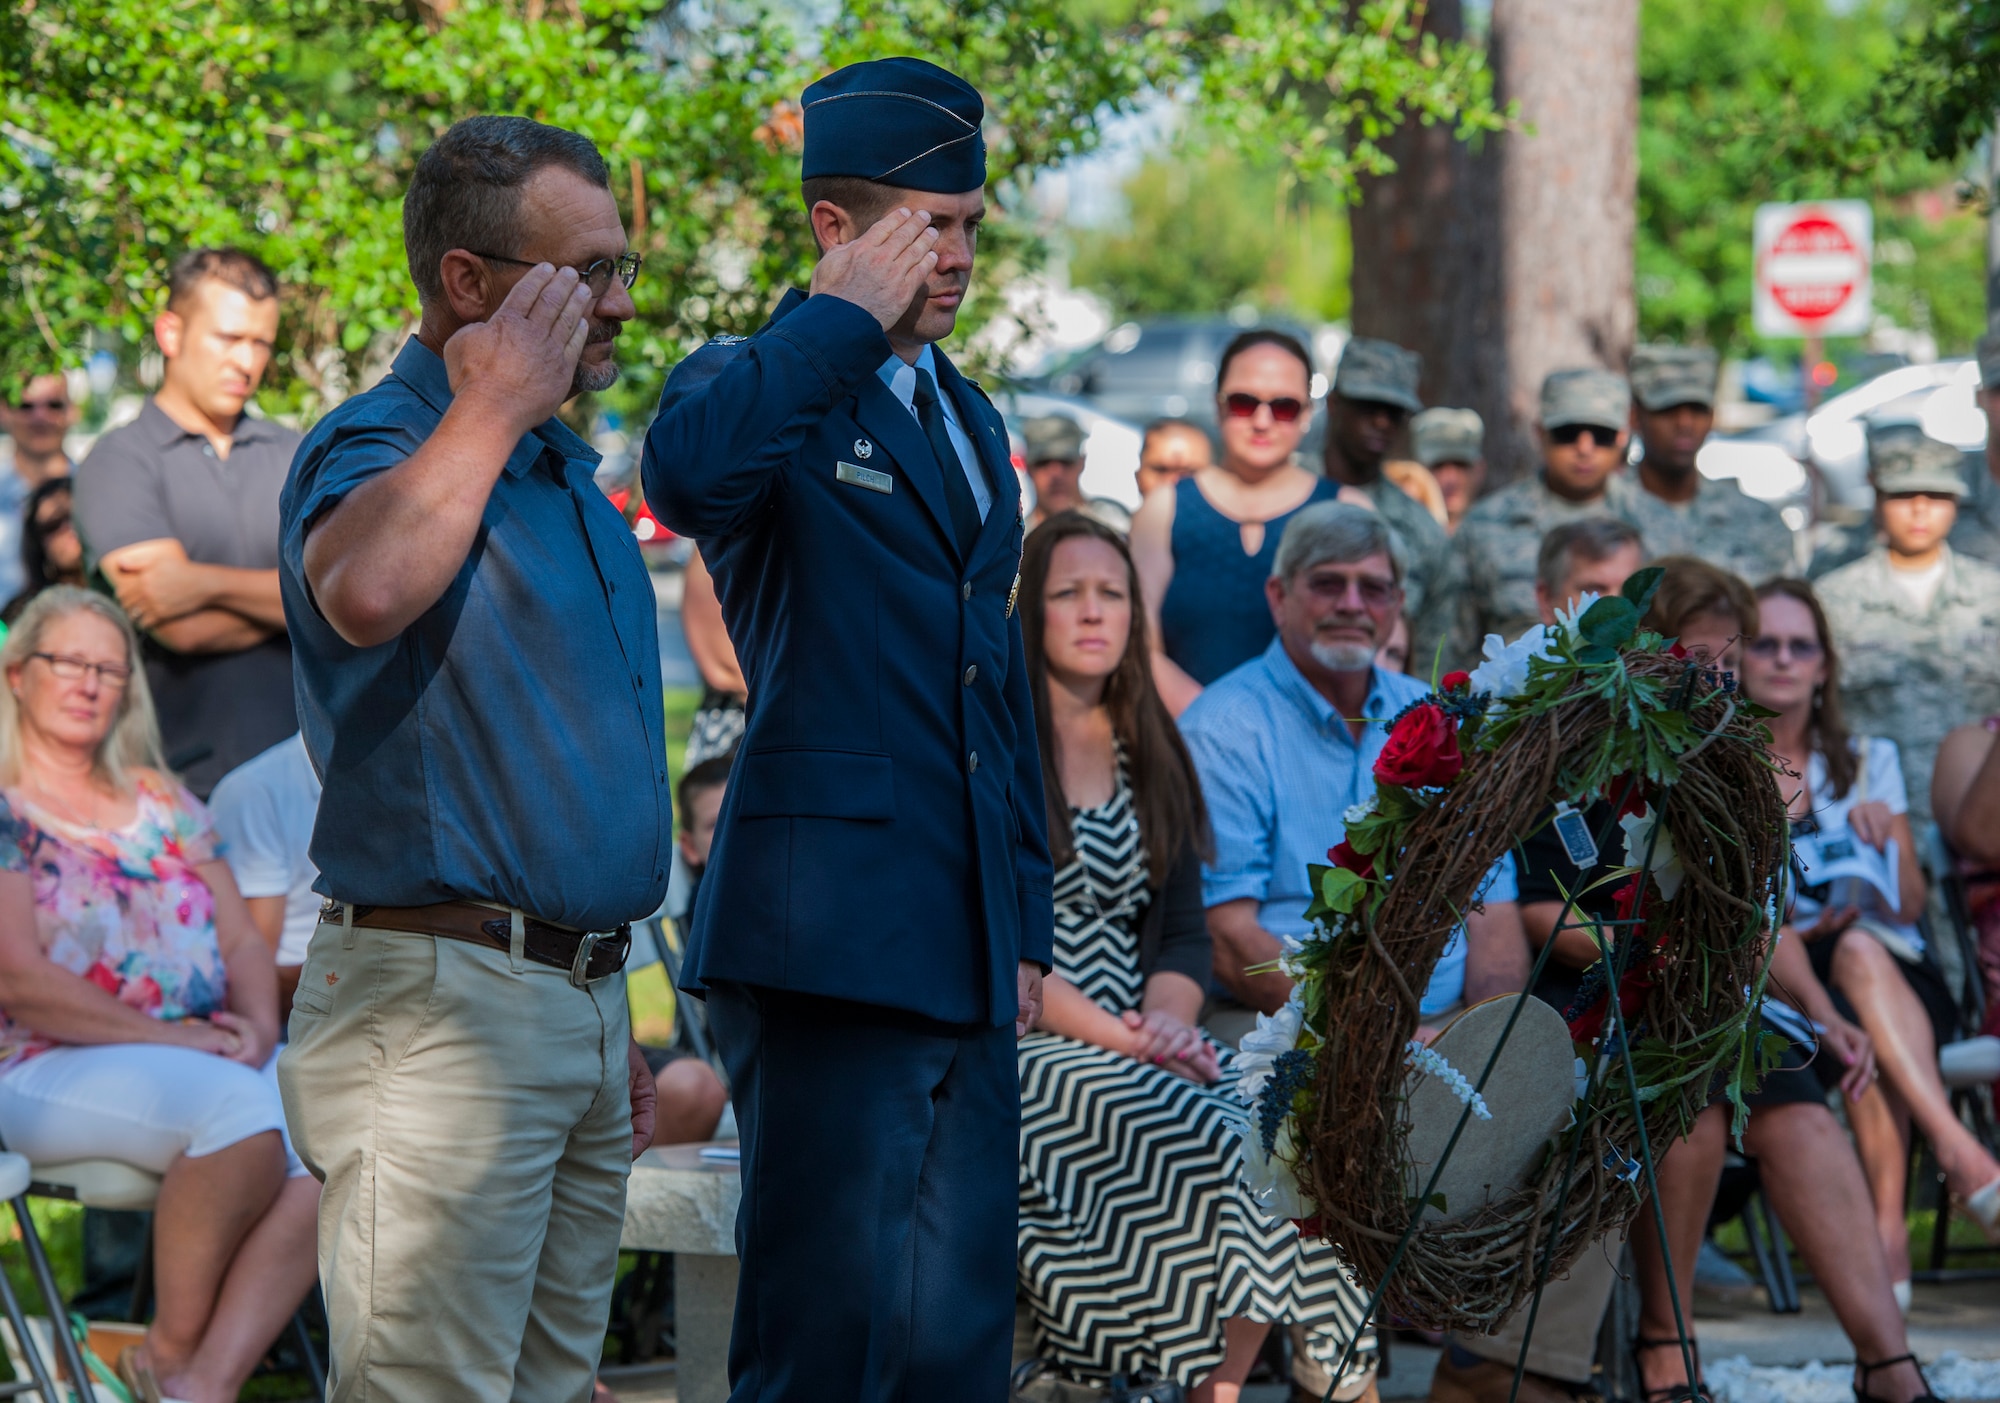 Tech. Sgt. (retired) David Westrup, left, 58th Fighter Squadron crew chief, and Col. Lance Pilch, 33rd Fighter Wing commander, render a salute during the 19th anniversary Khobar Tower memorial ceremony, June 25, 2015, on Eglin Air Force Base, Florida. The 12 Nomads honored at the ceremony were members of the 58th Fighter Squadron, 60th Fighter Squadron, 33rd Logistics Group, 33rd Maintenance Squadron and the 33rd Operations Support Squadron. They represented a cross-section of the wing as crew chiefs, expeditors, weapons loaders, mechanics, production superintendents, program managers and technicians. The memorial here honoring the Nomads’ memory was dedicated a year after the tragedy. (U.S. Air Force photo/Staff Sgt. Marleah Robertson)